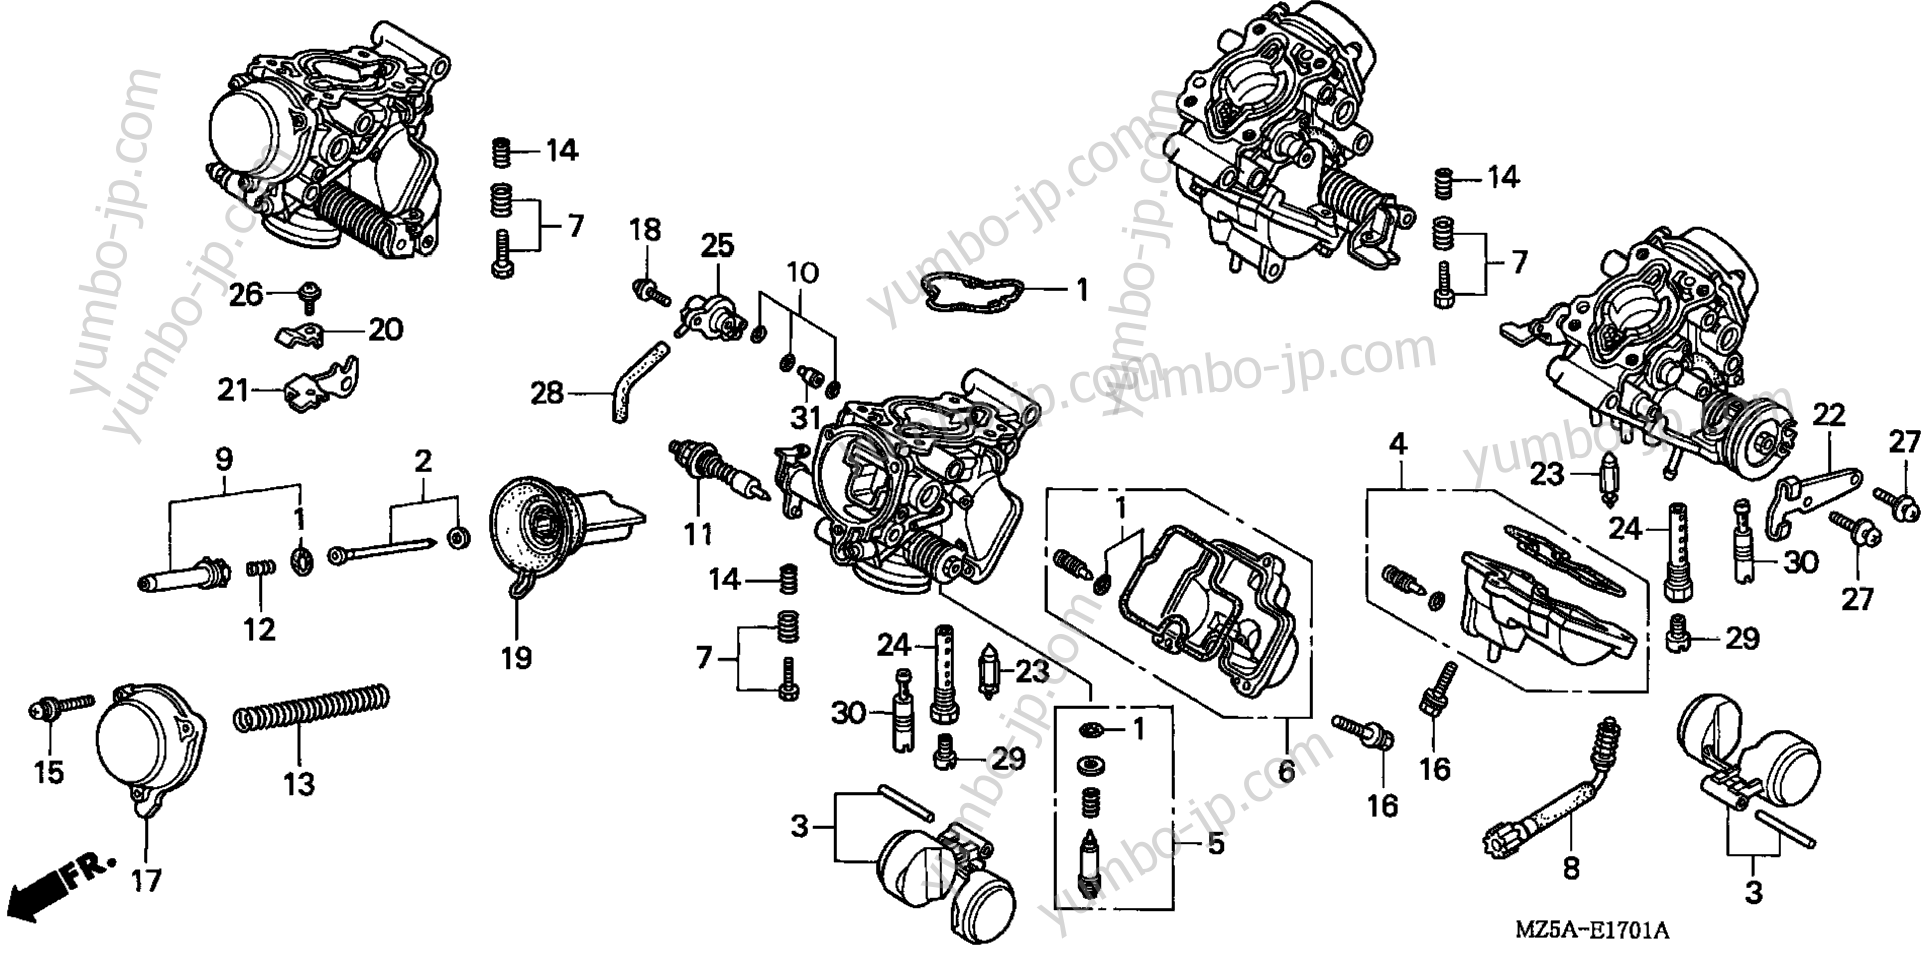 CARBURETOR COMPONENTS for motorcycles HONDA VF750C A 1998 year